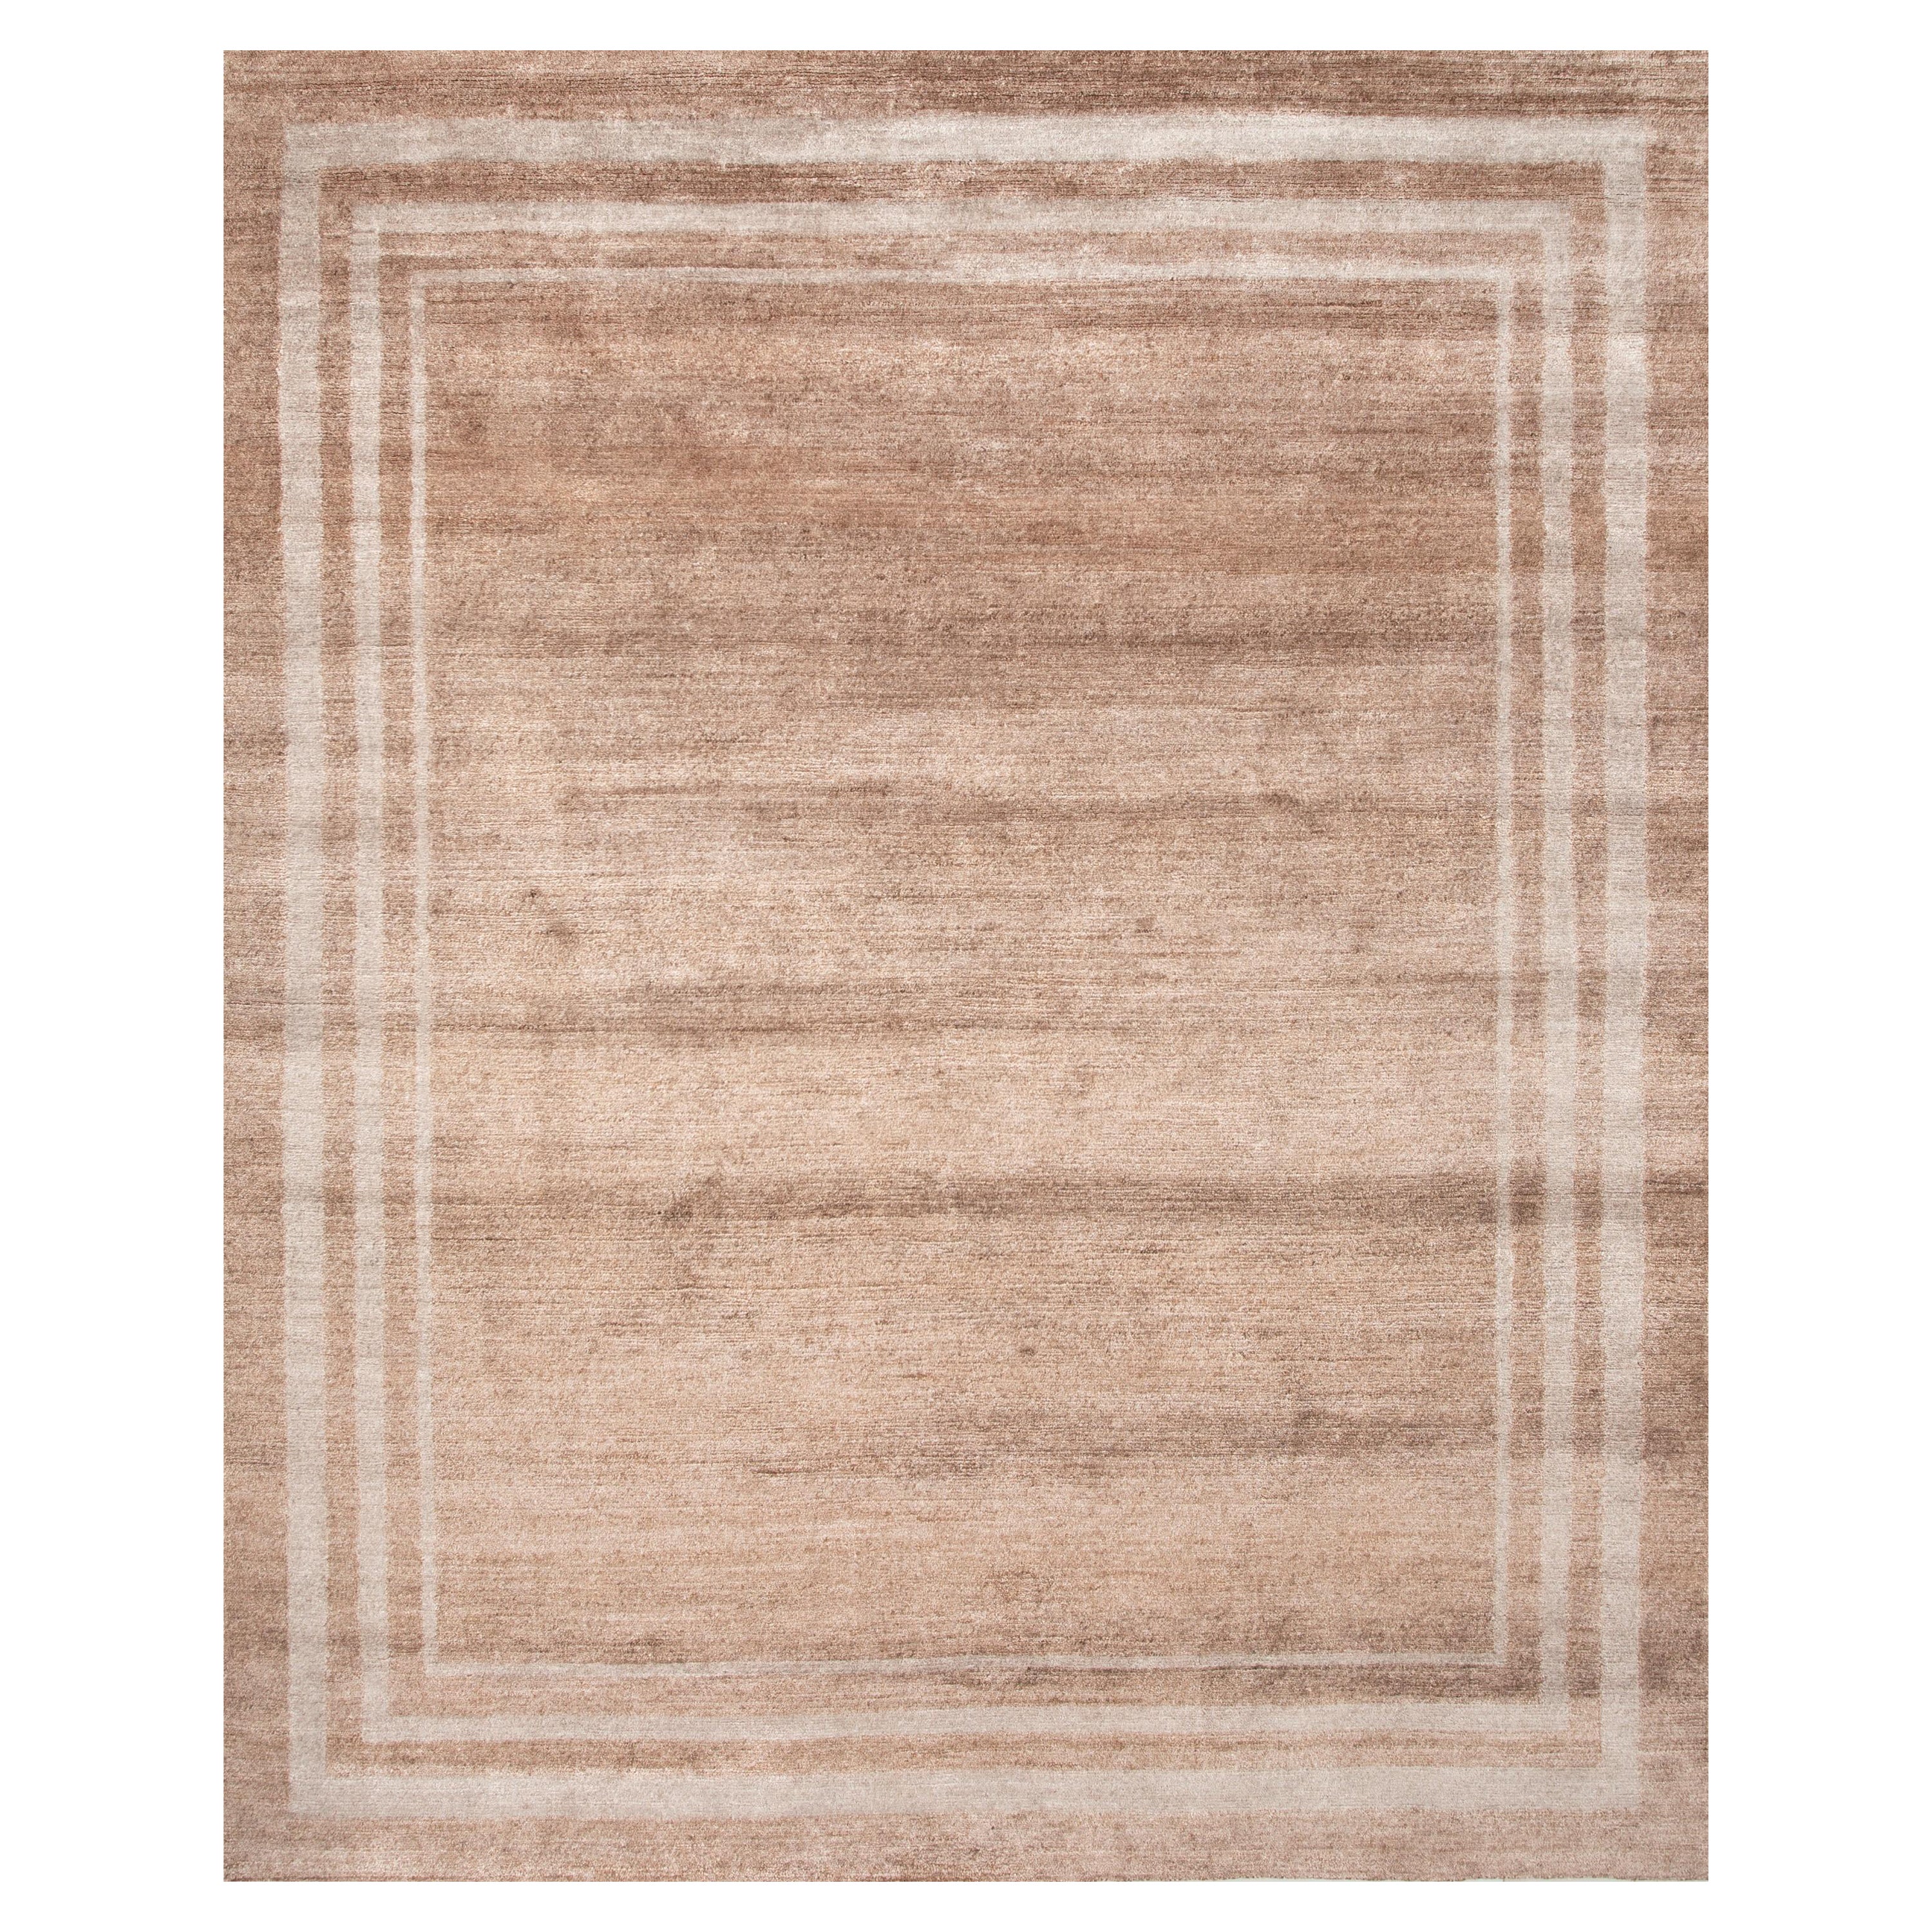 Soft Embrace Tobacco & Pebble 240X300 cm Handknotted Rug For Sale